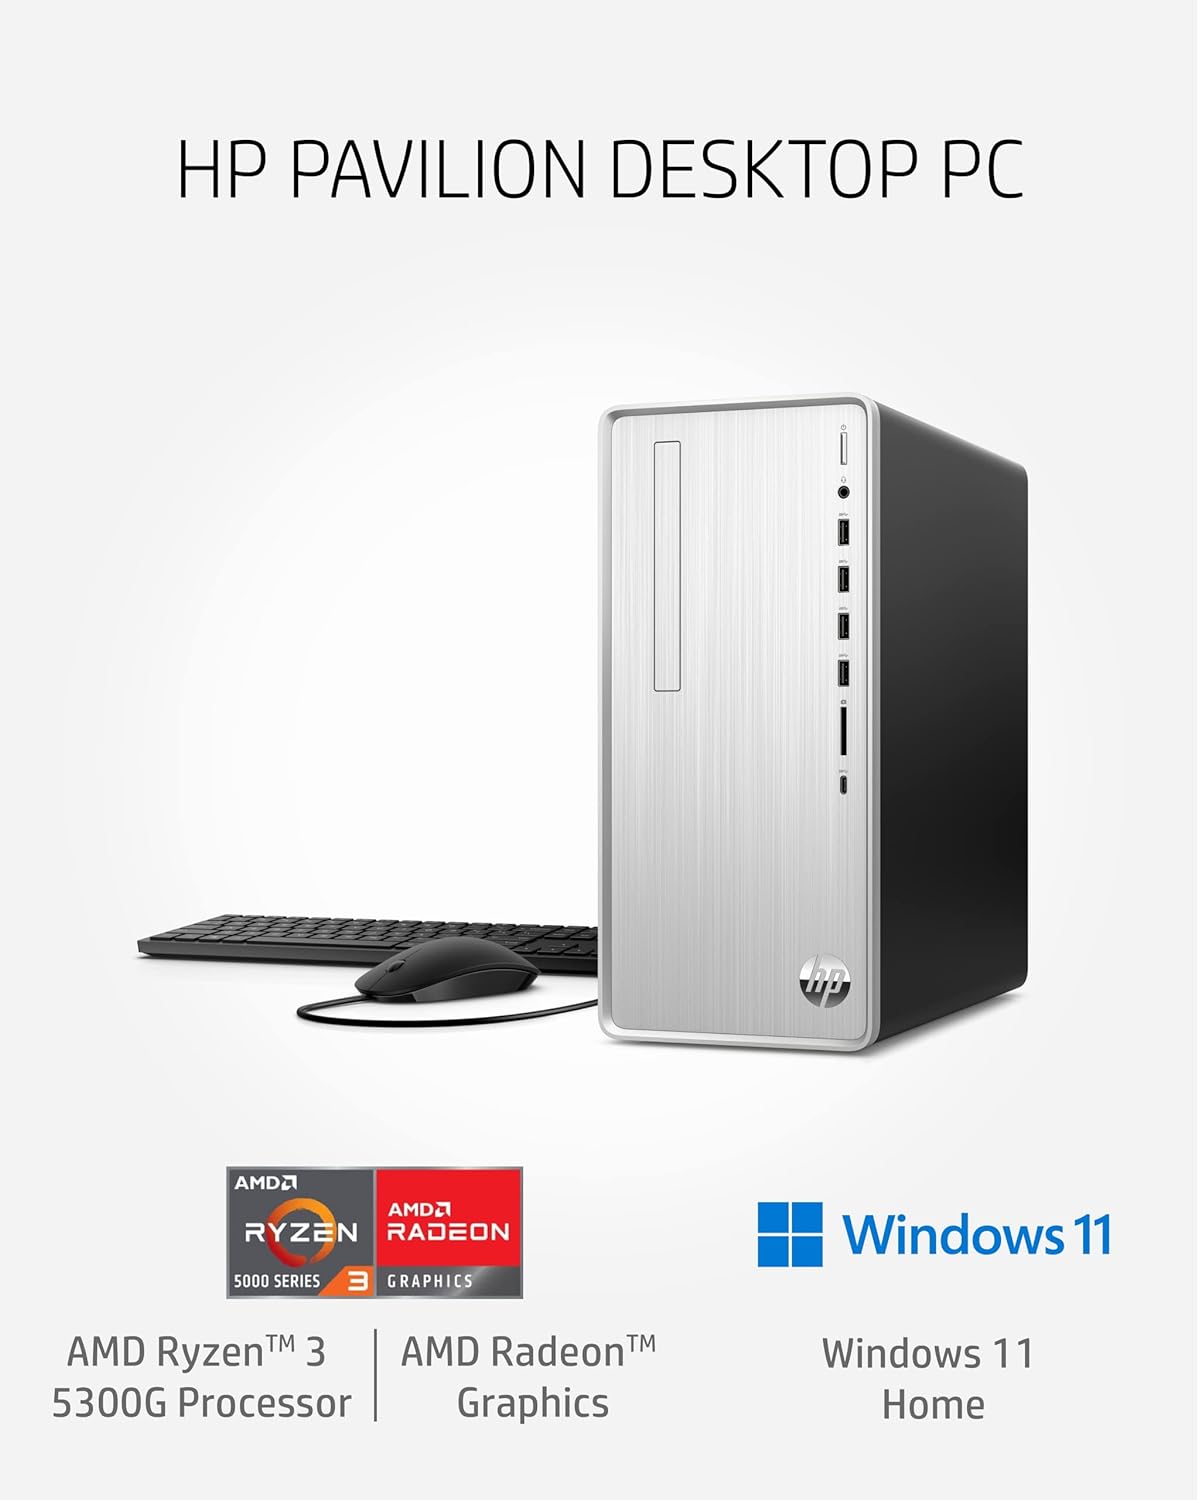 HP Pavilion Desktop PC, AMD Ryzen 3 5300G, 4 GB RAM, 256 GB SSD, Windows 11 Home, Wi-Fi 5  Bluetooth, 9 USB Ports, Wired Mouse and Keyboard Combo, Pre-Built Tower (TP01-2032, 2021) (Renewed)